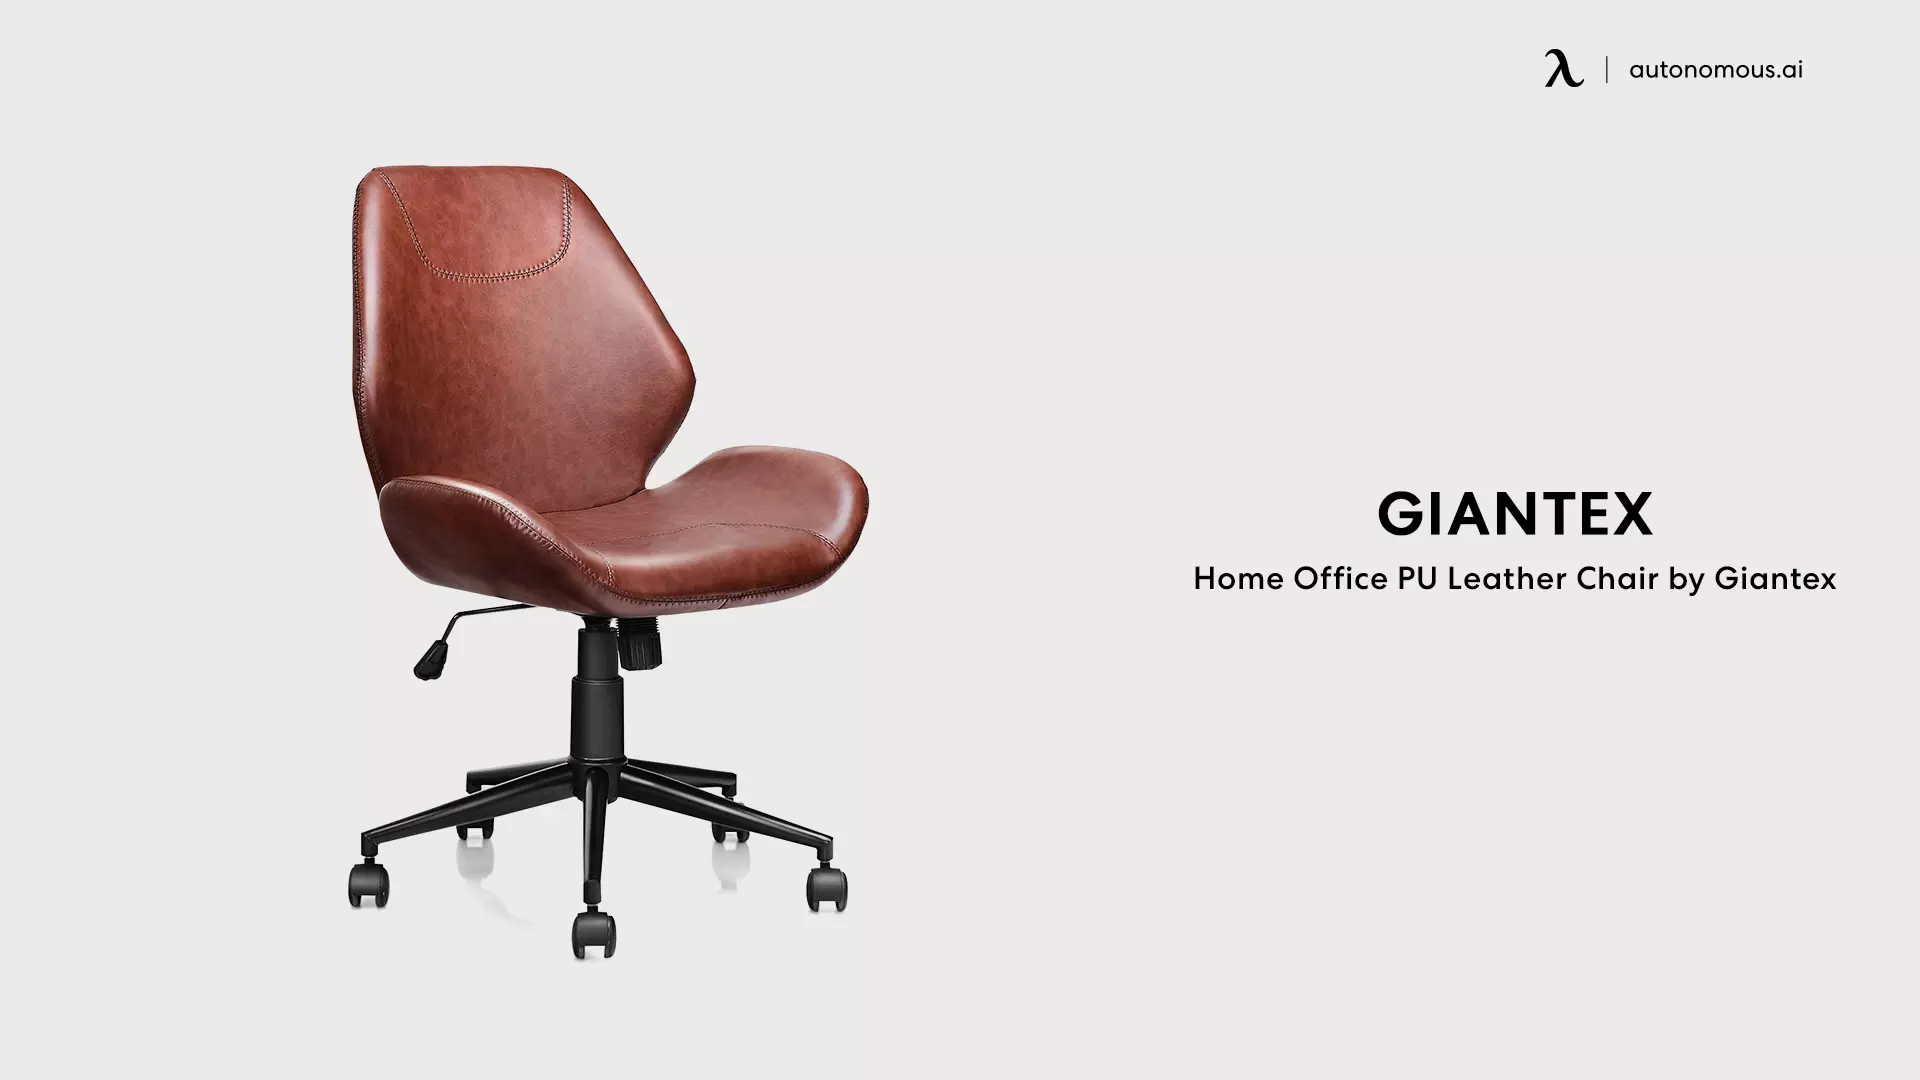 Home Office PU Leather Chair by Giantex